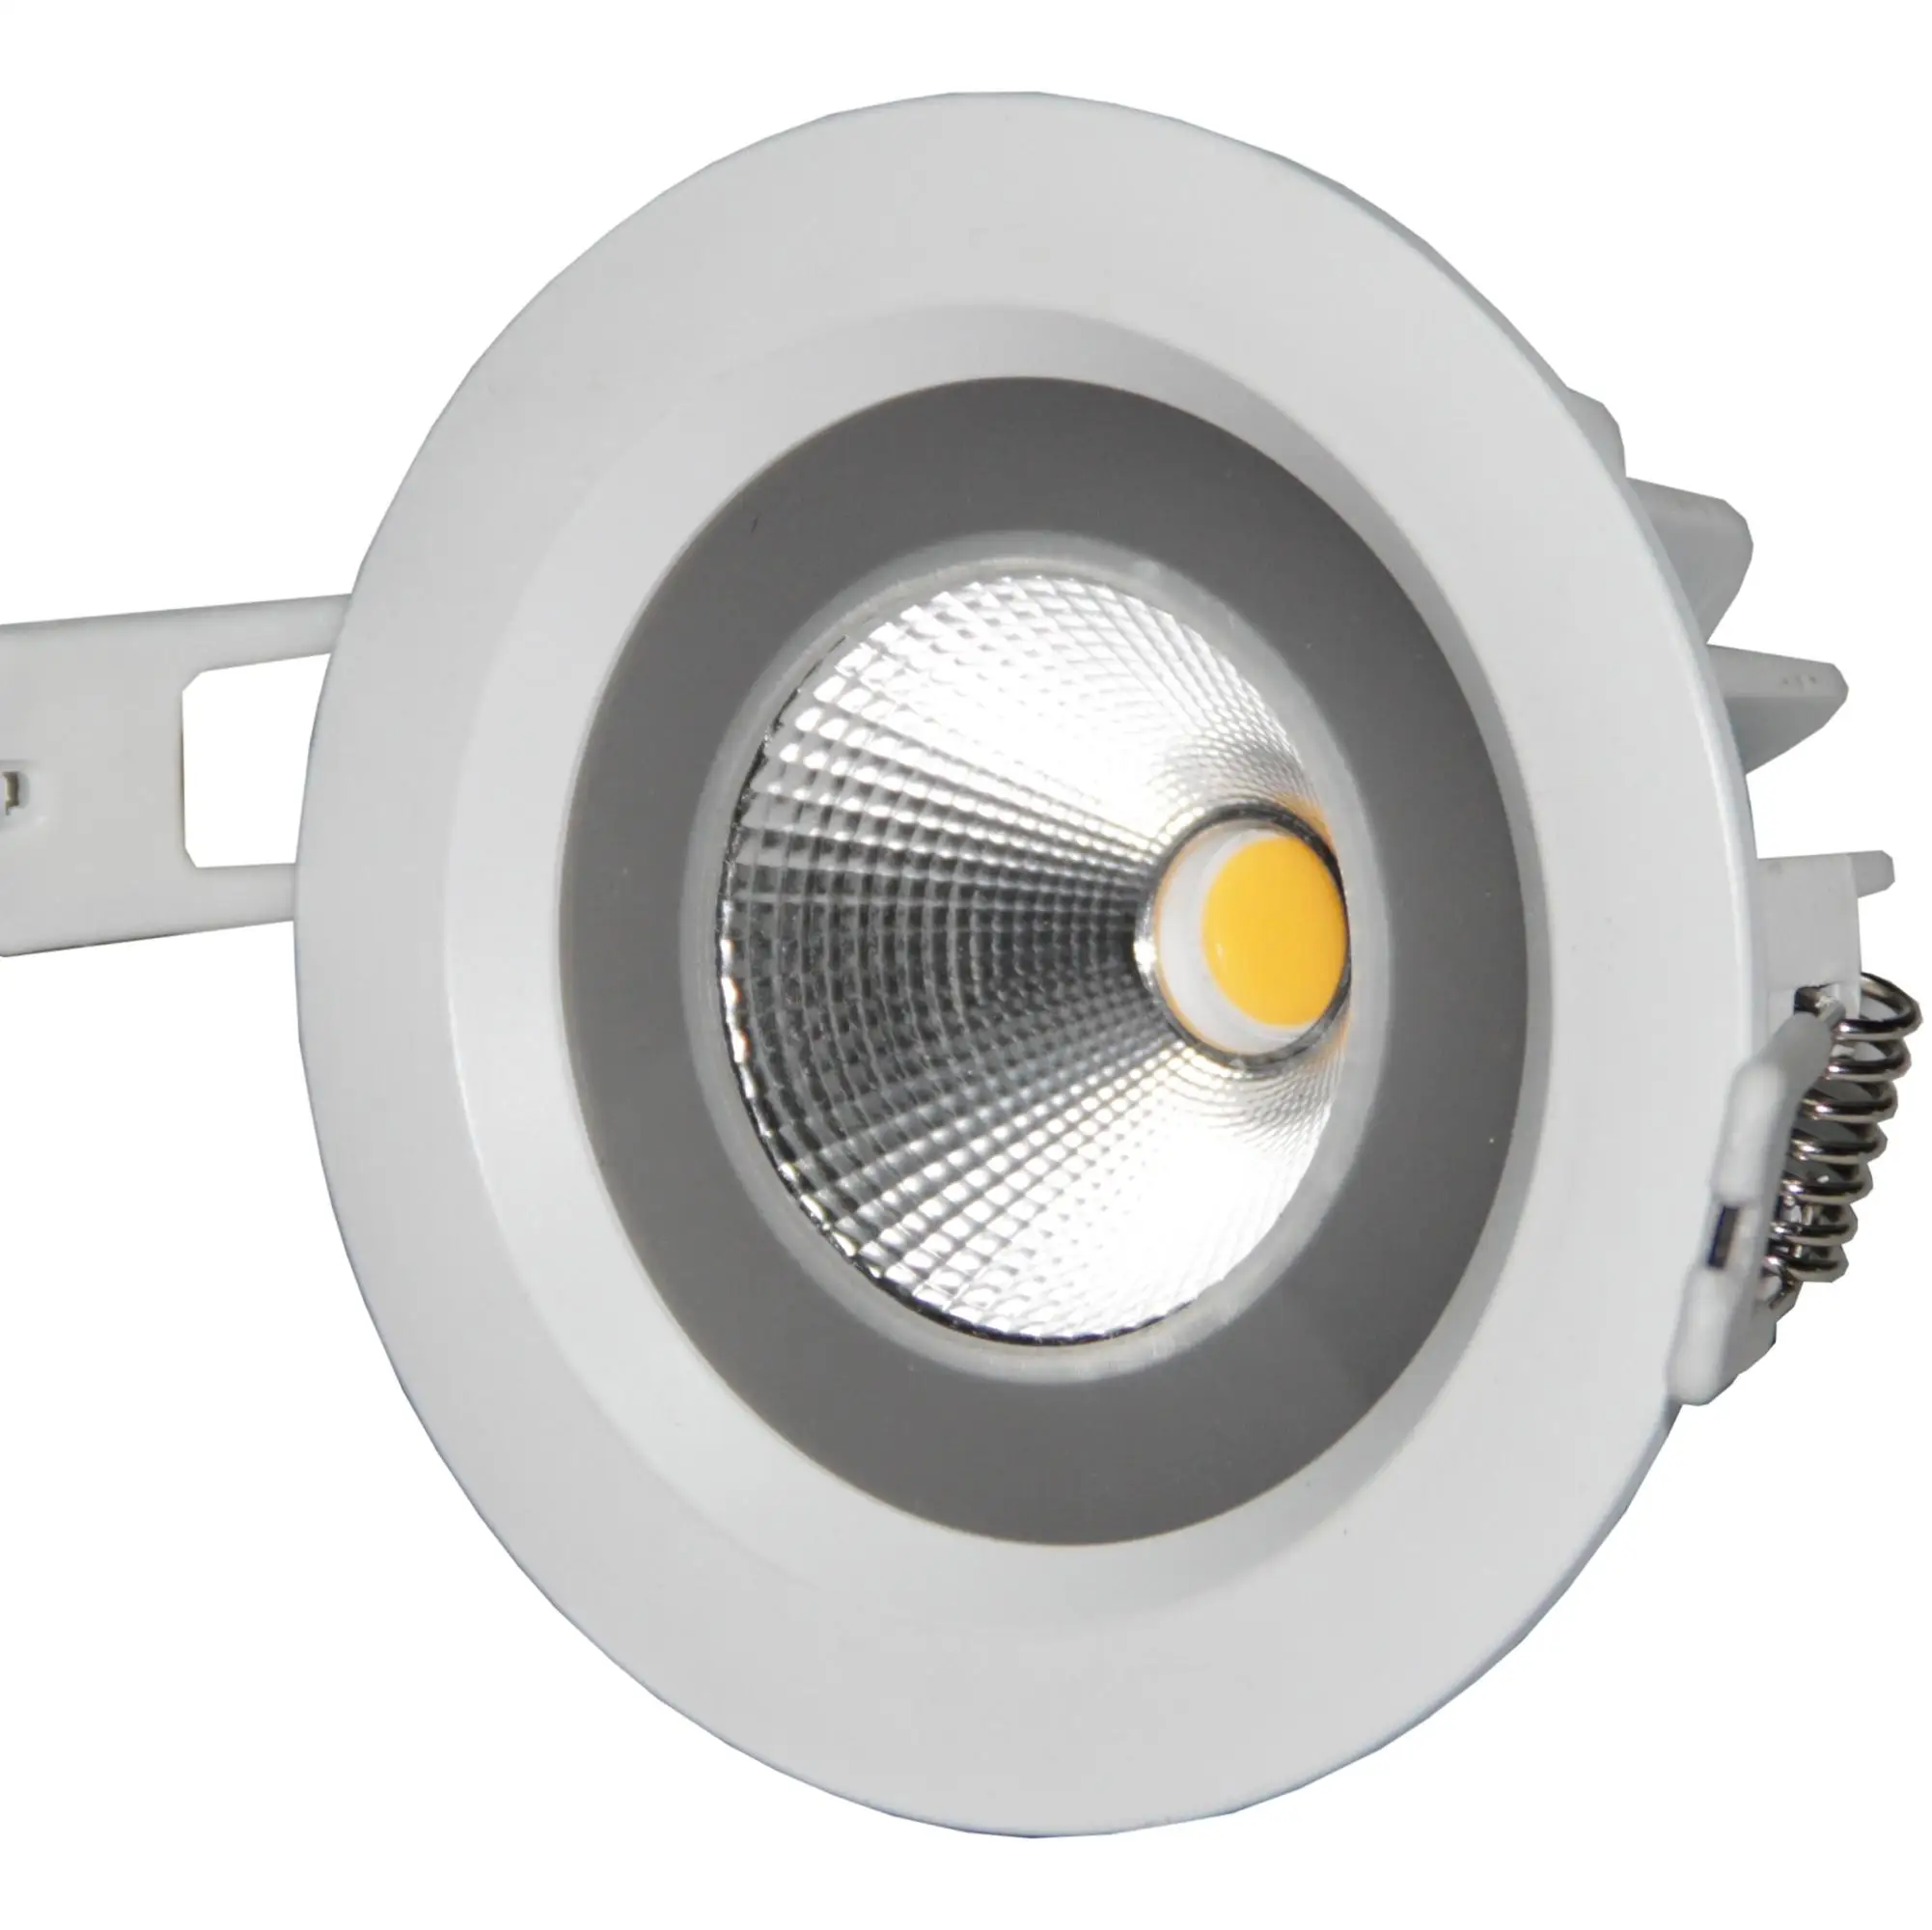 115mm cut out led downlight ip65 10w waterproof bathroom ceiling lighting recessed smd down lights